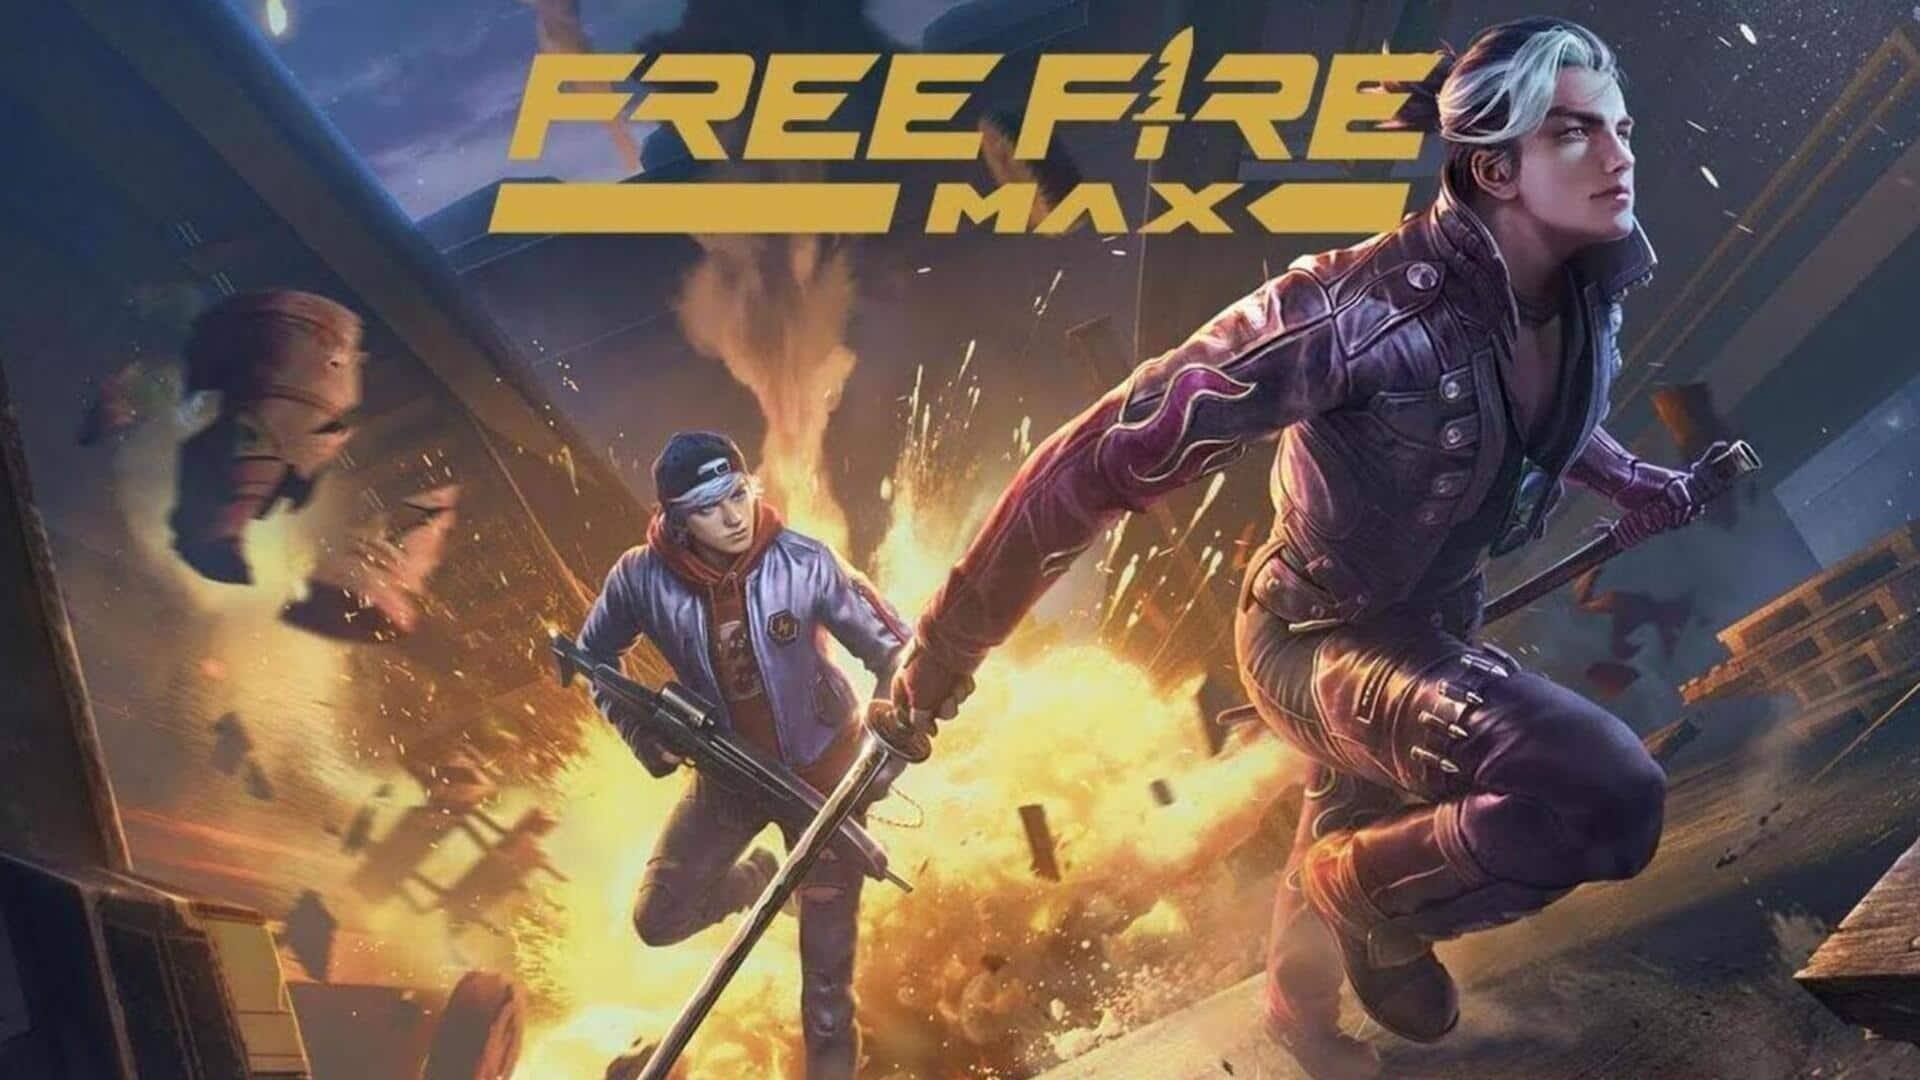 Garena Free Fire MAX codes for today: How to redeem